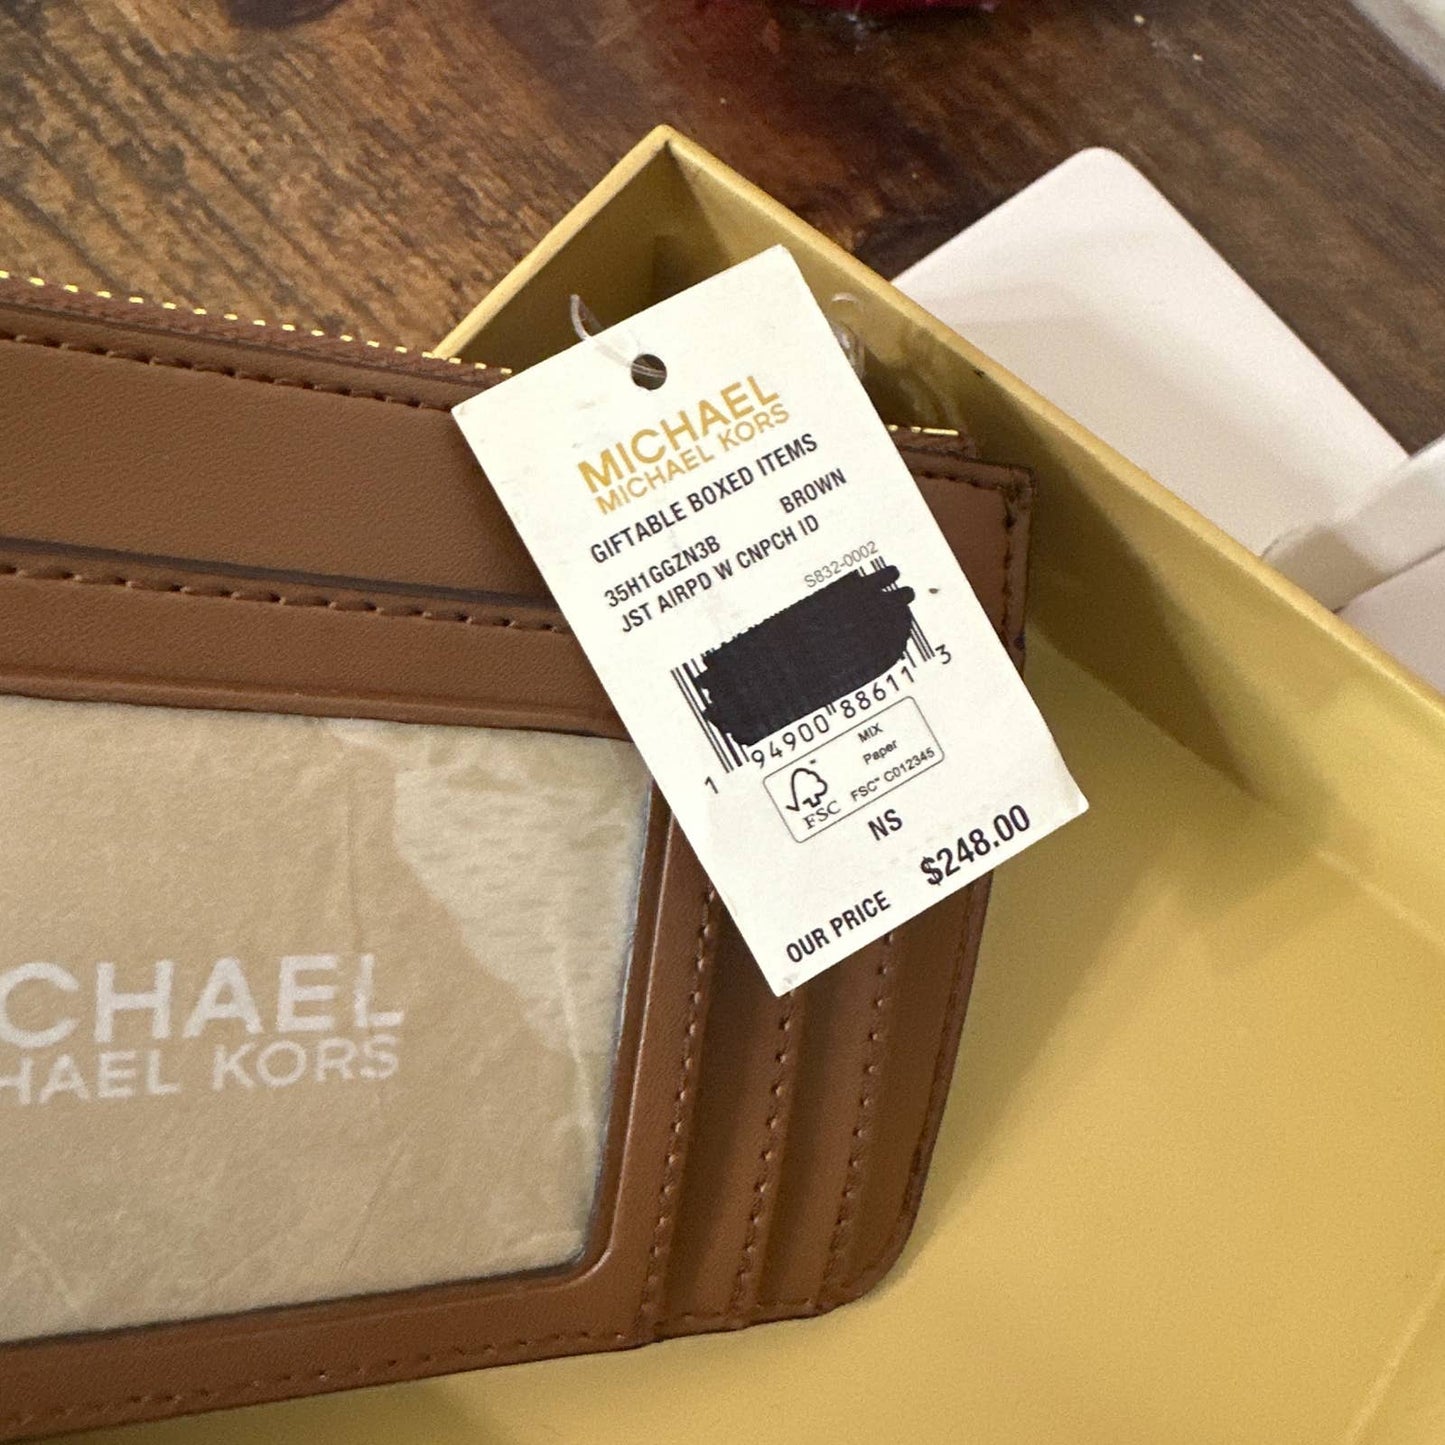 NWT MICHAEL KORS Signature Card Holder / Coin Purse and Airpods Case Gift Set